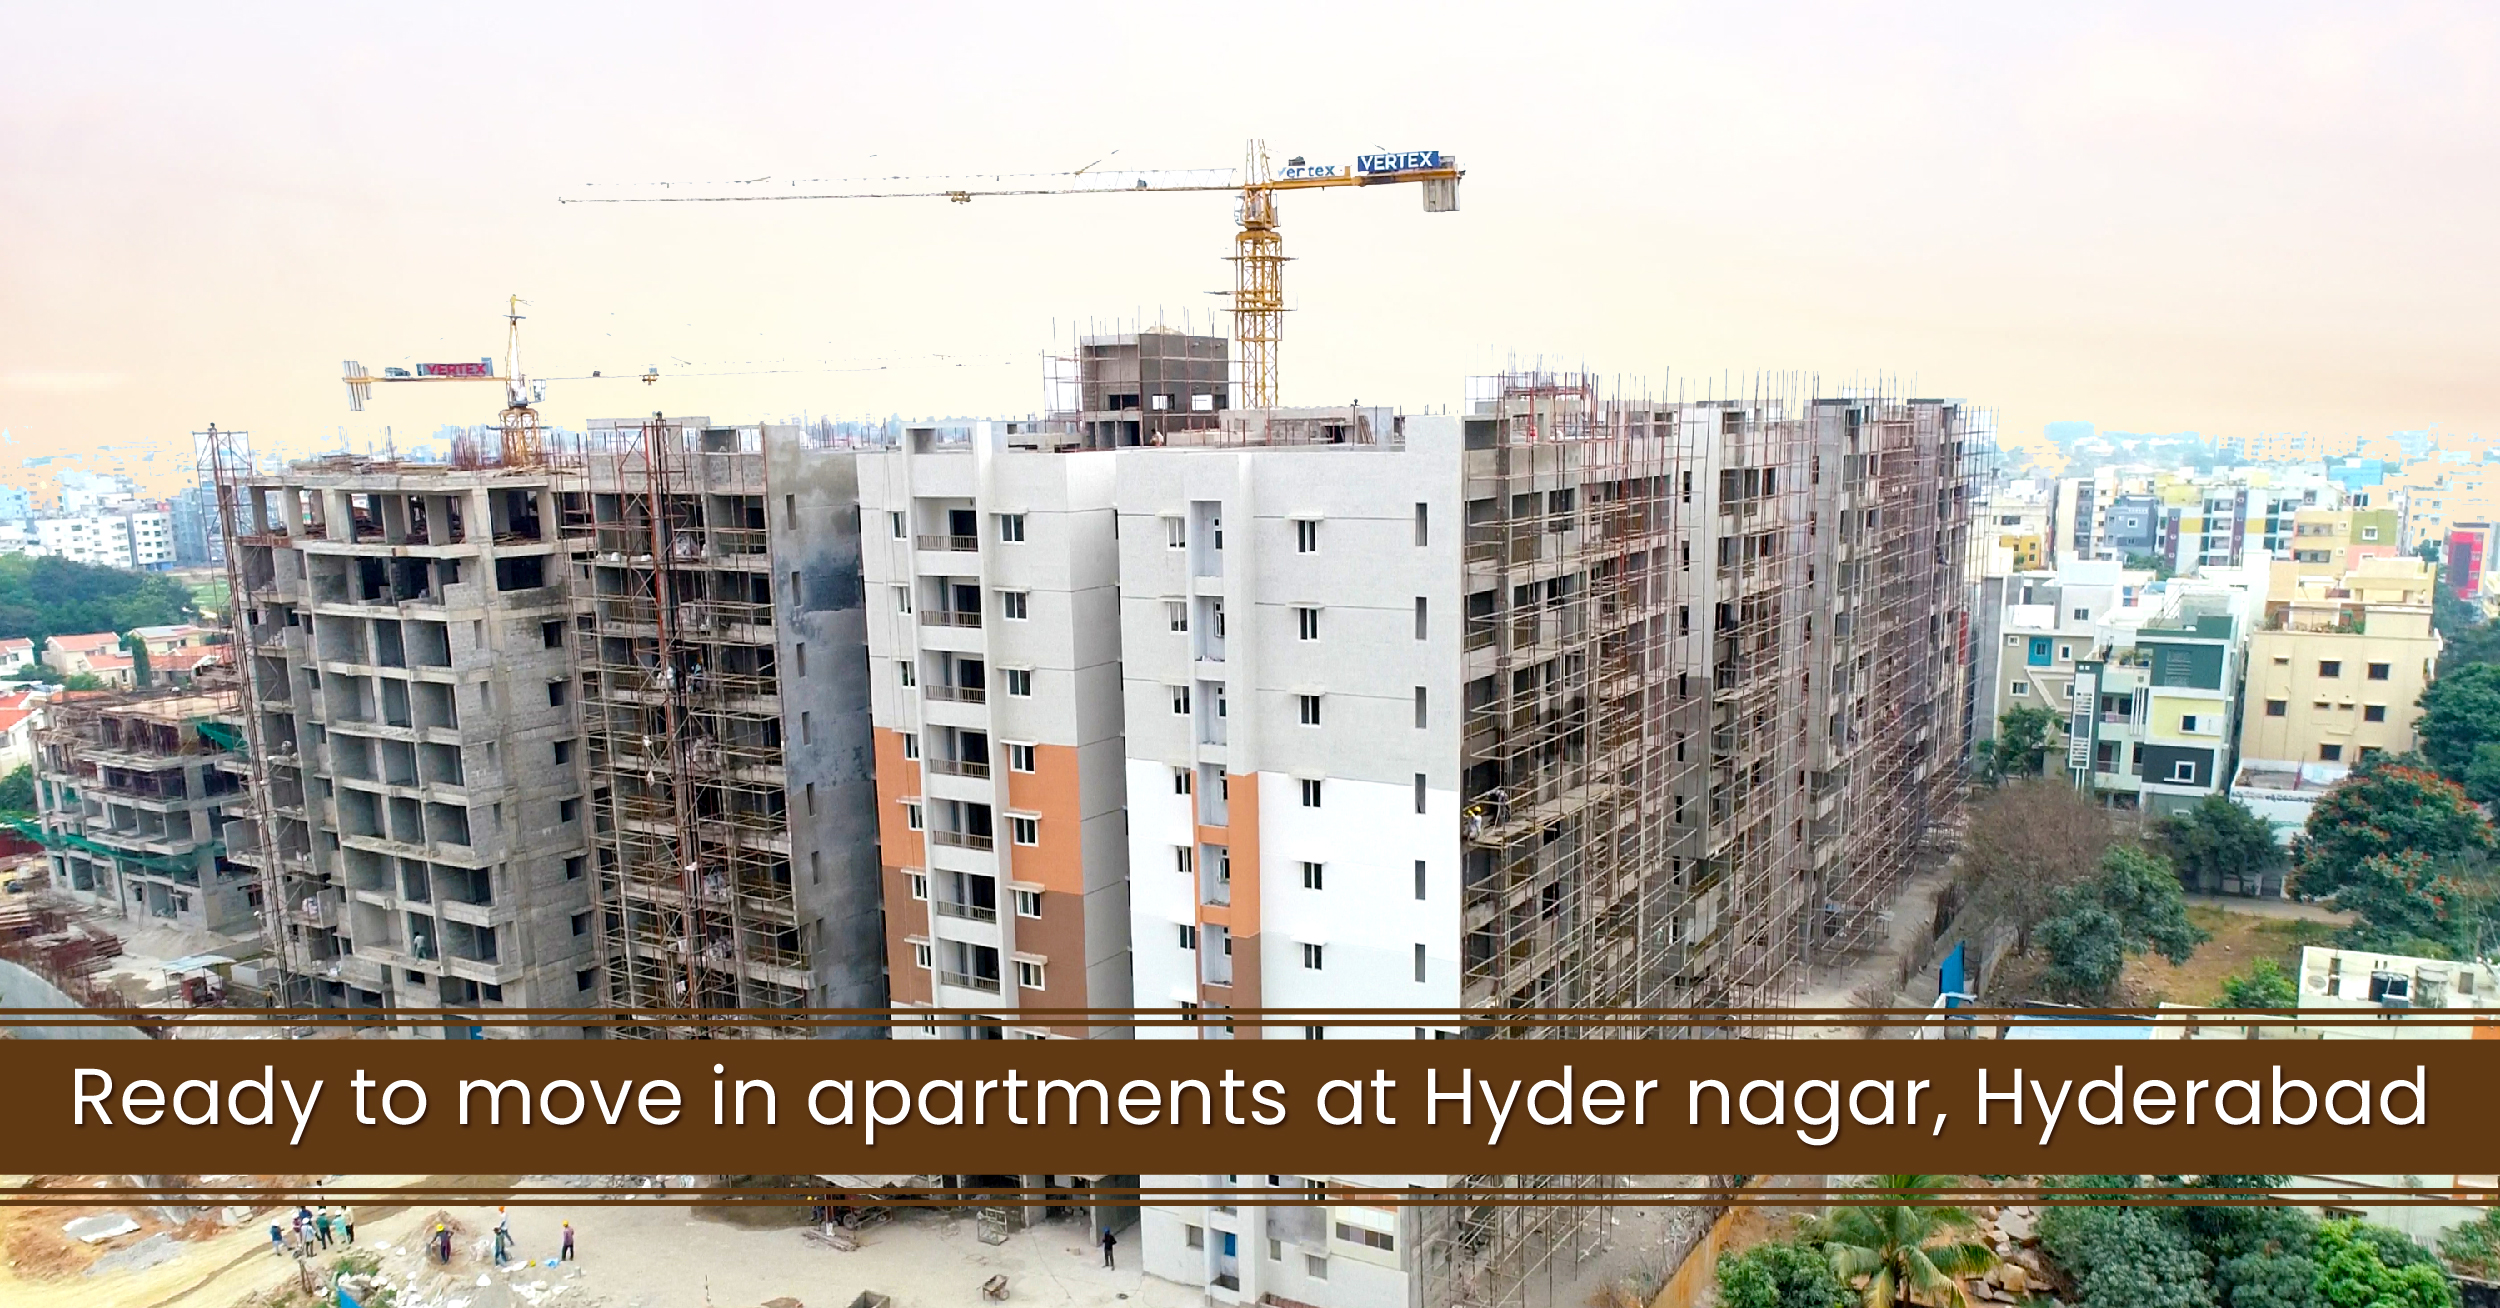 Ready to Move In Apartments At Hyder Nagar, Hyderabad